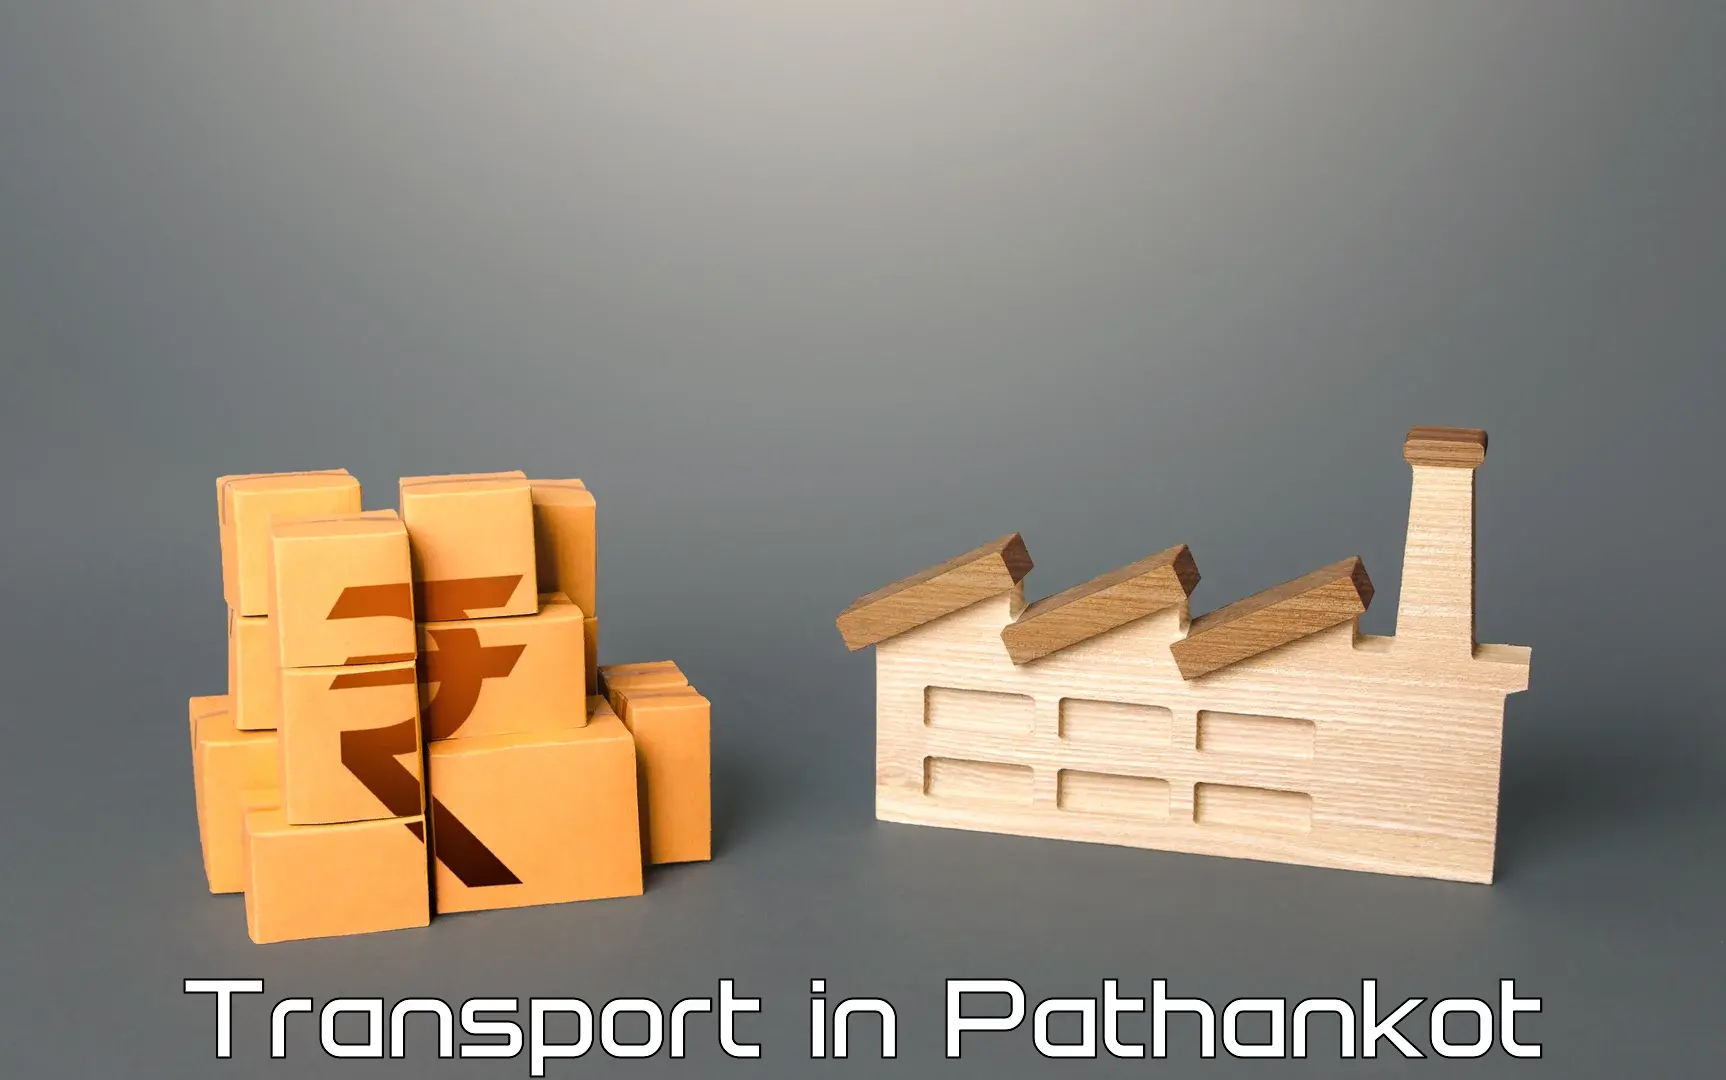 Express transport services in Pathankot